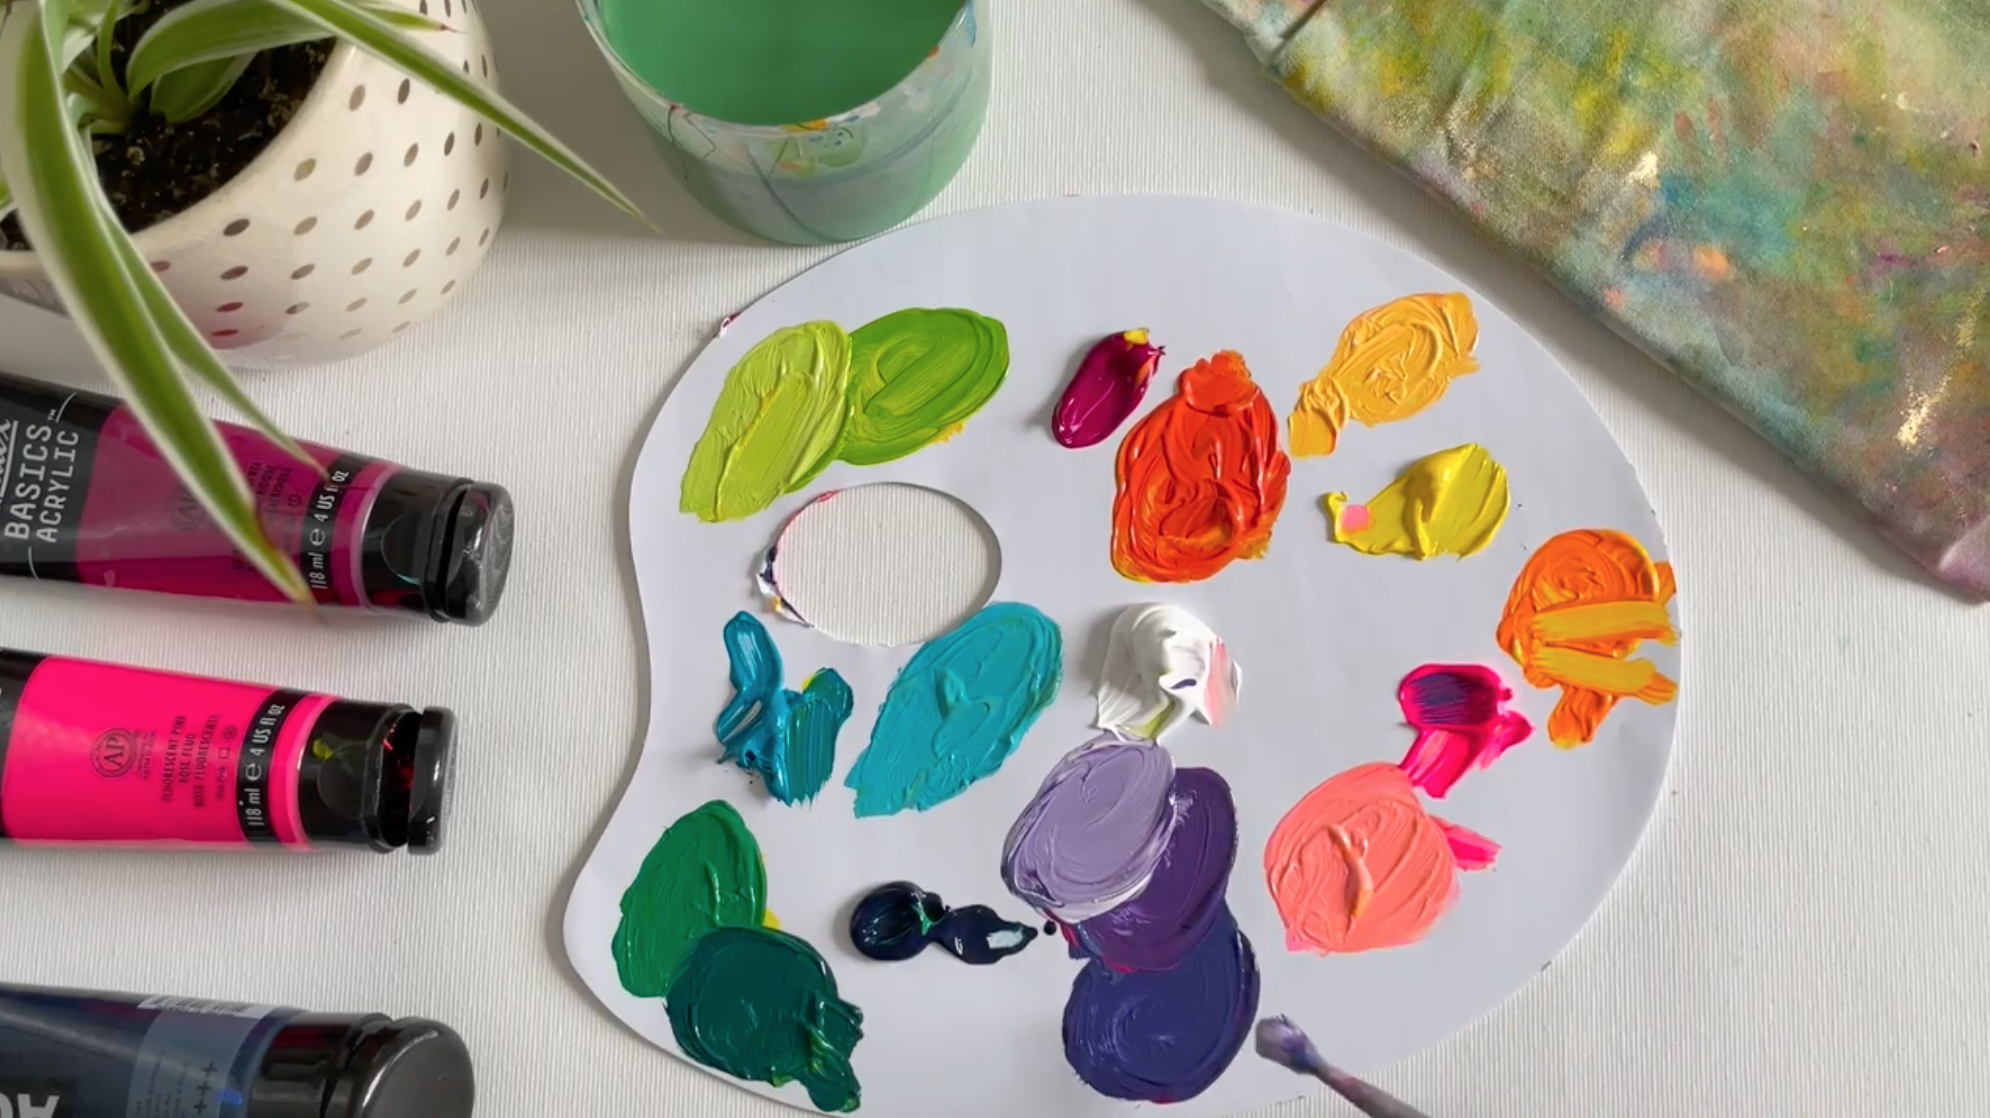 Acrylic Paint Color Mixing: Using Nontraditional Primaries to Mix